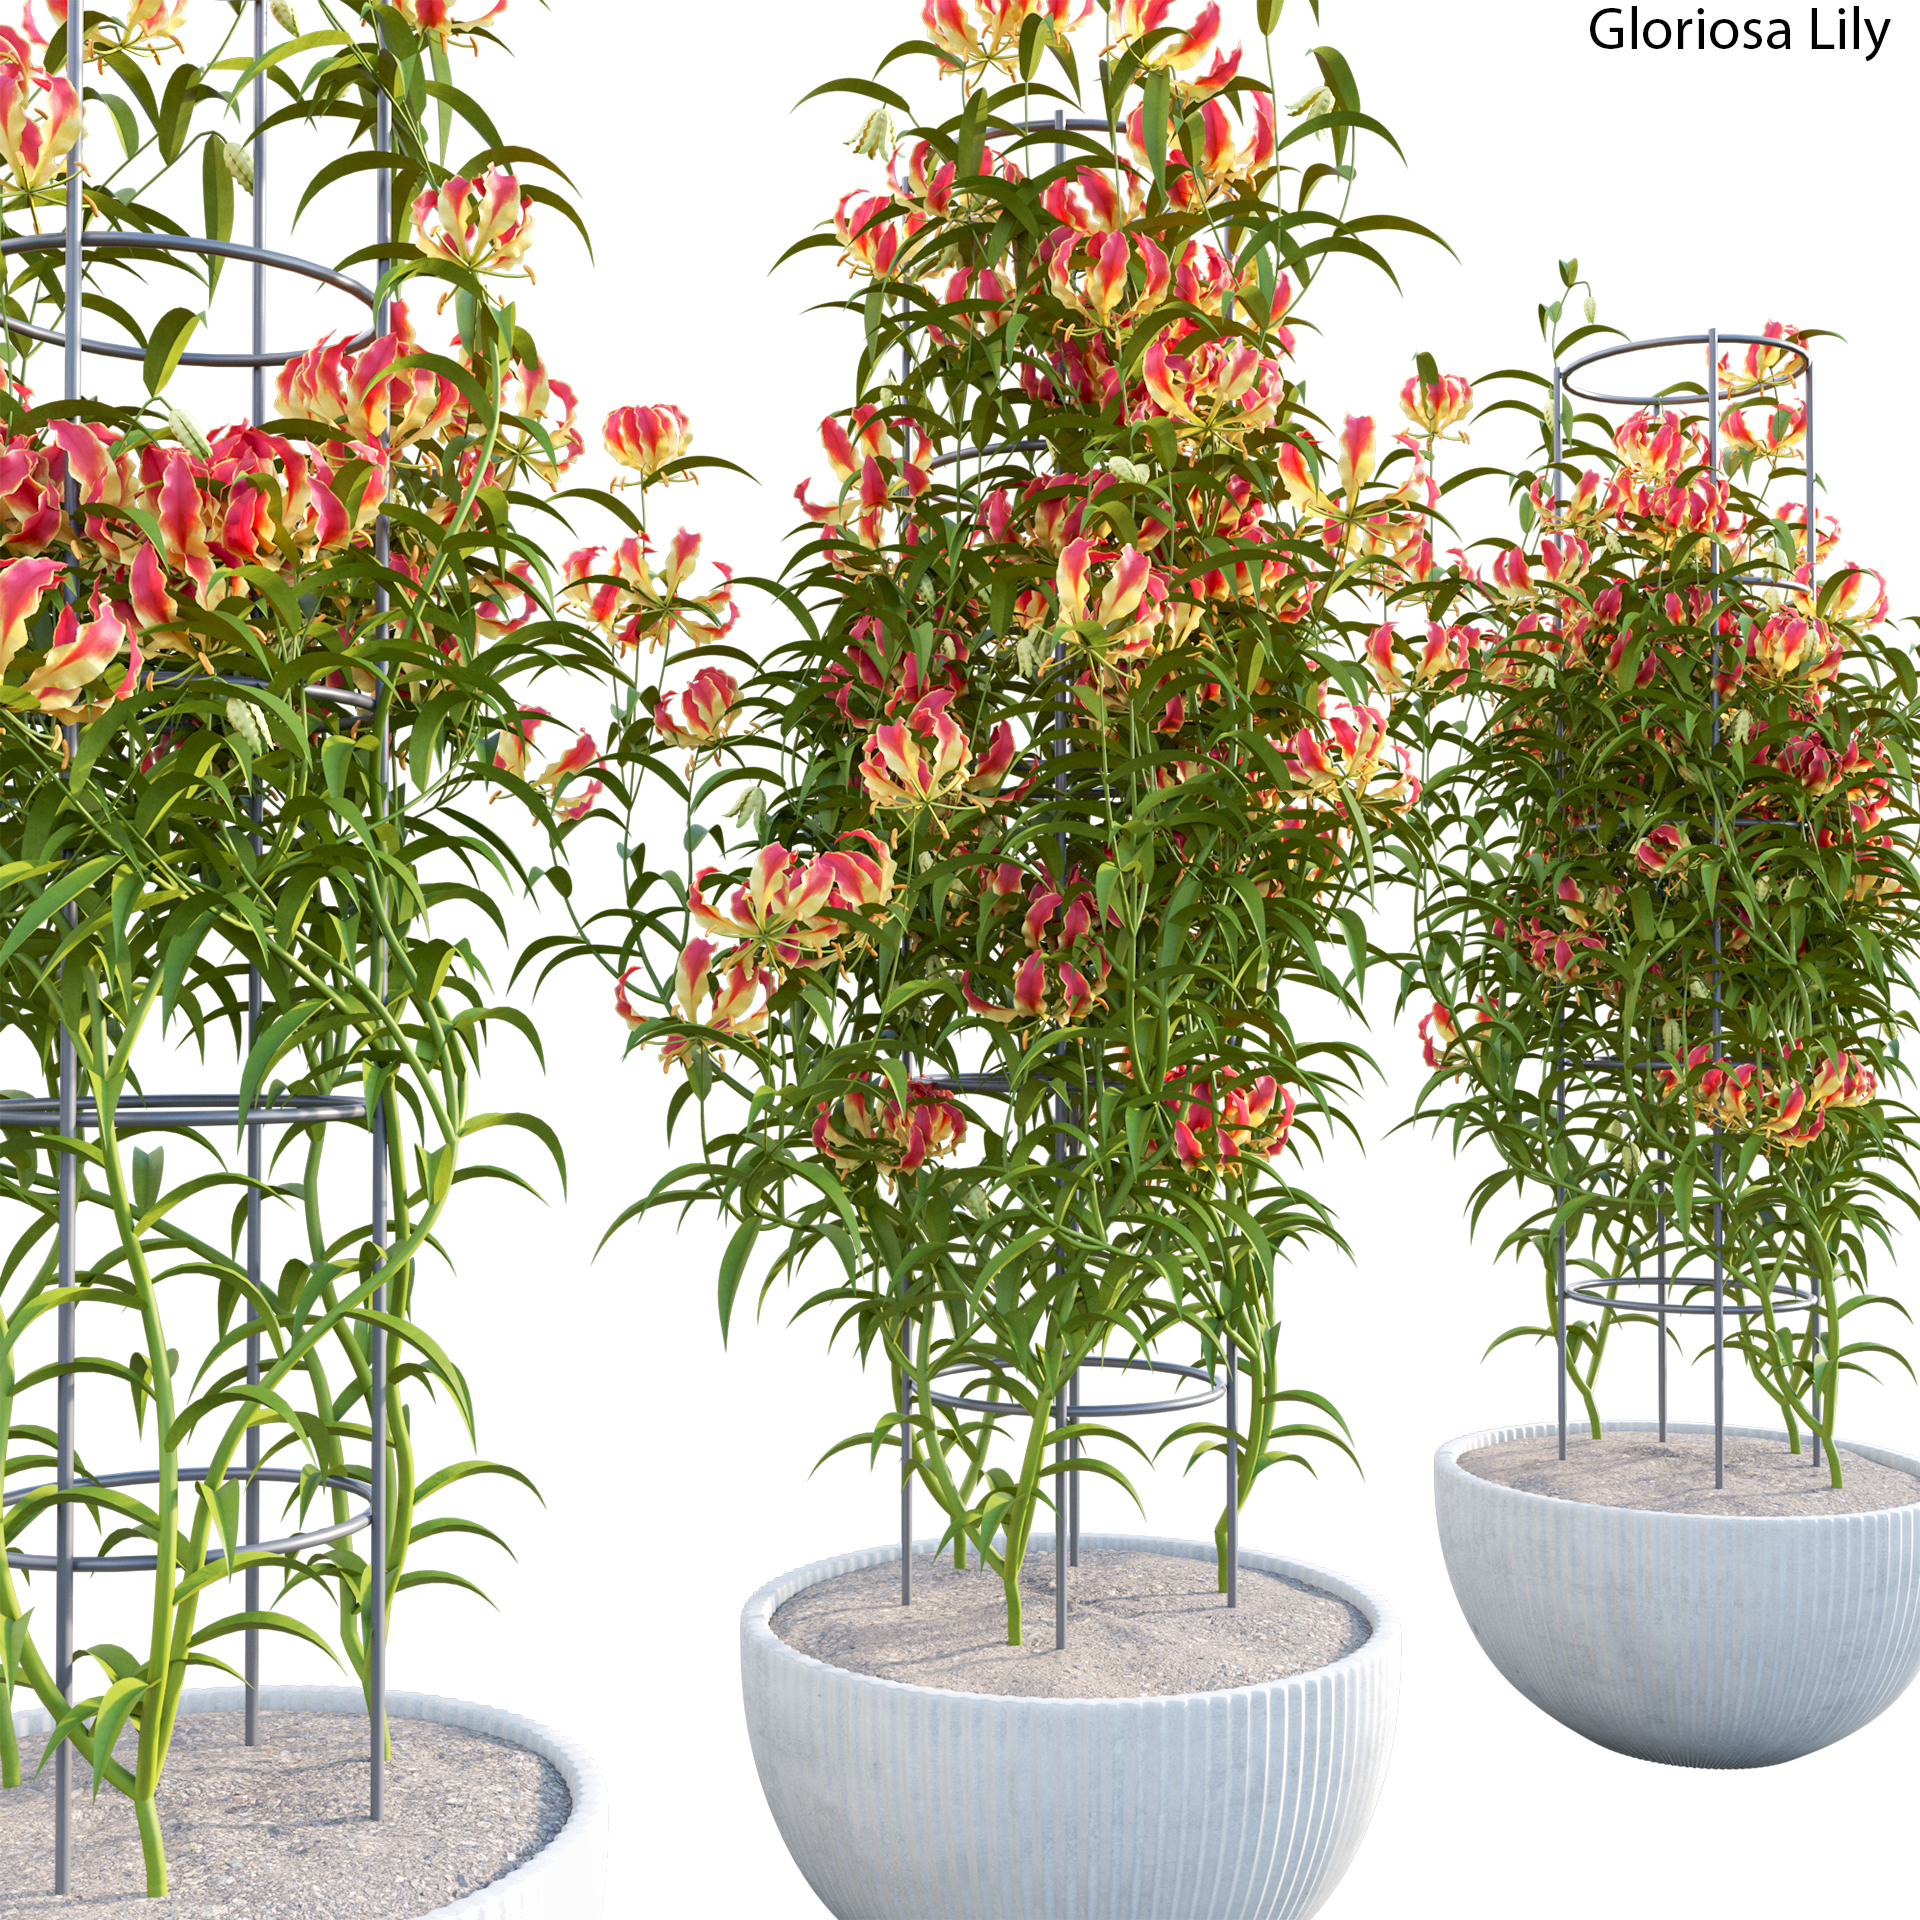 Gloriosa Lily - Flame lily - Climbing Lily